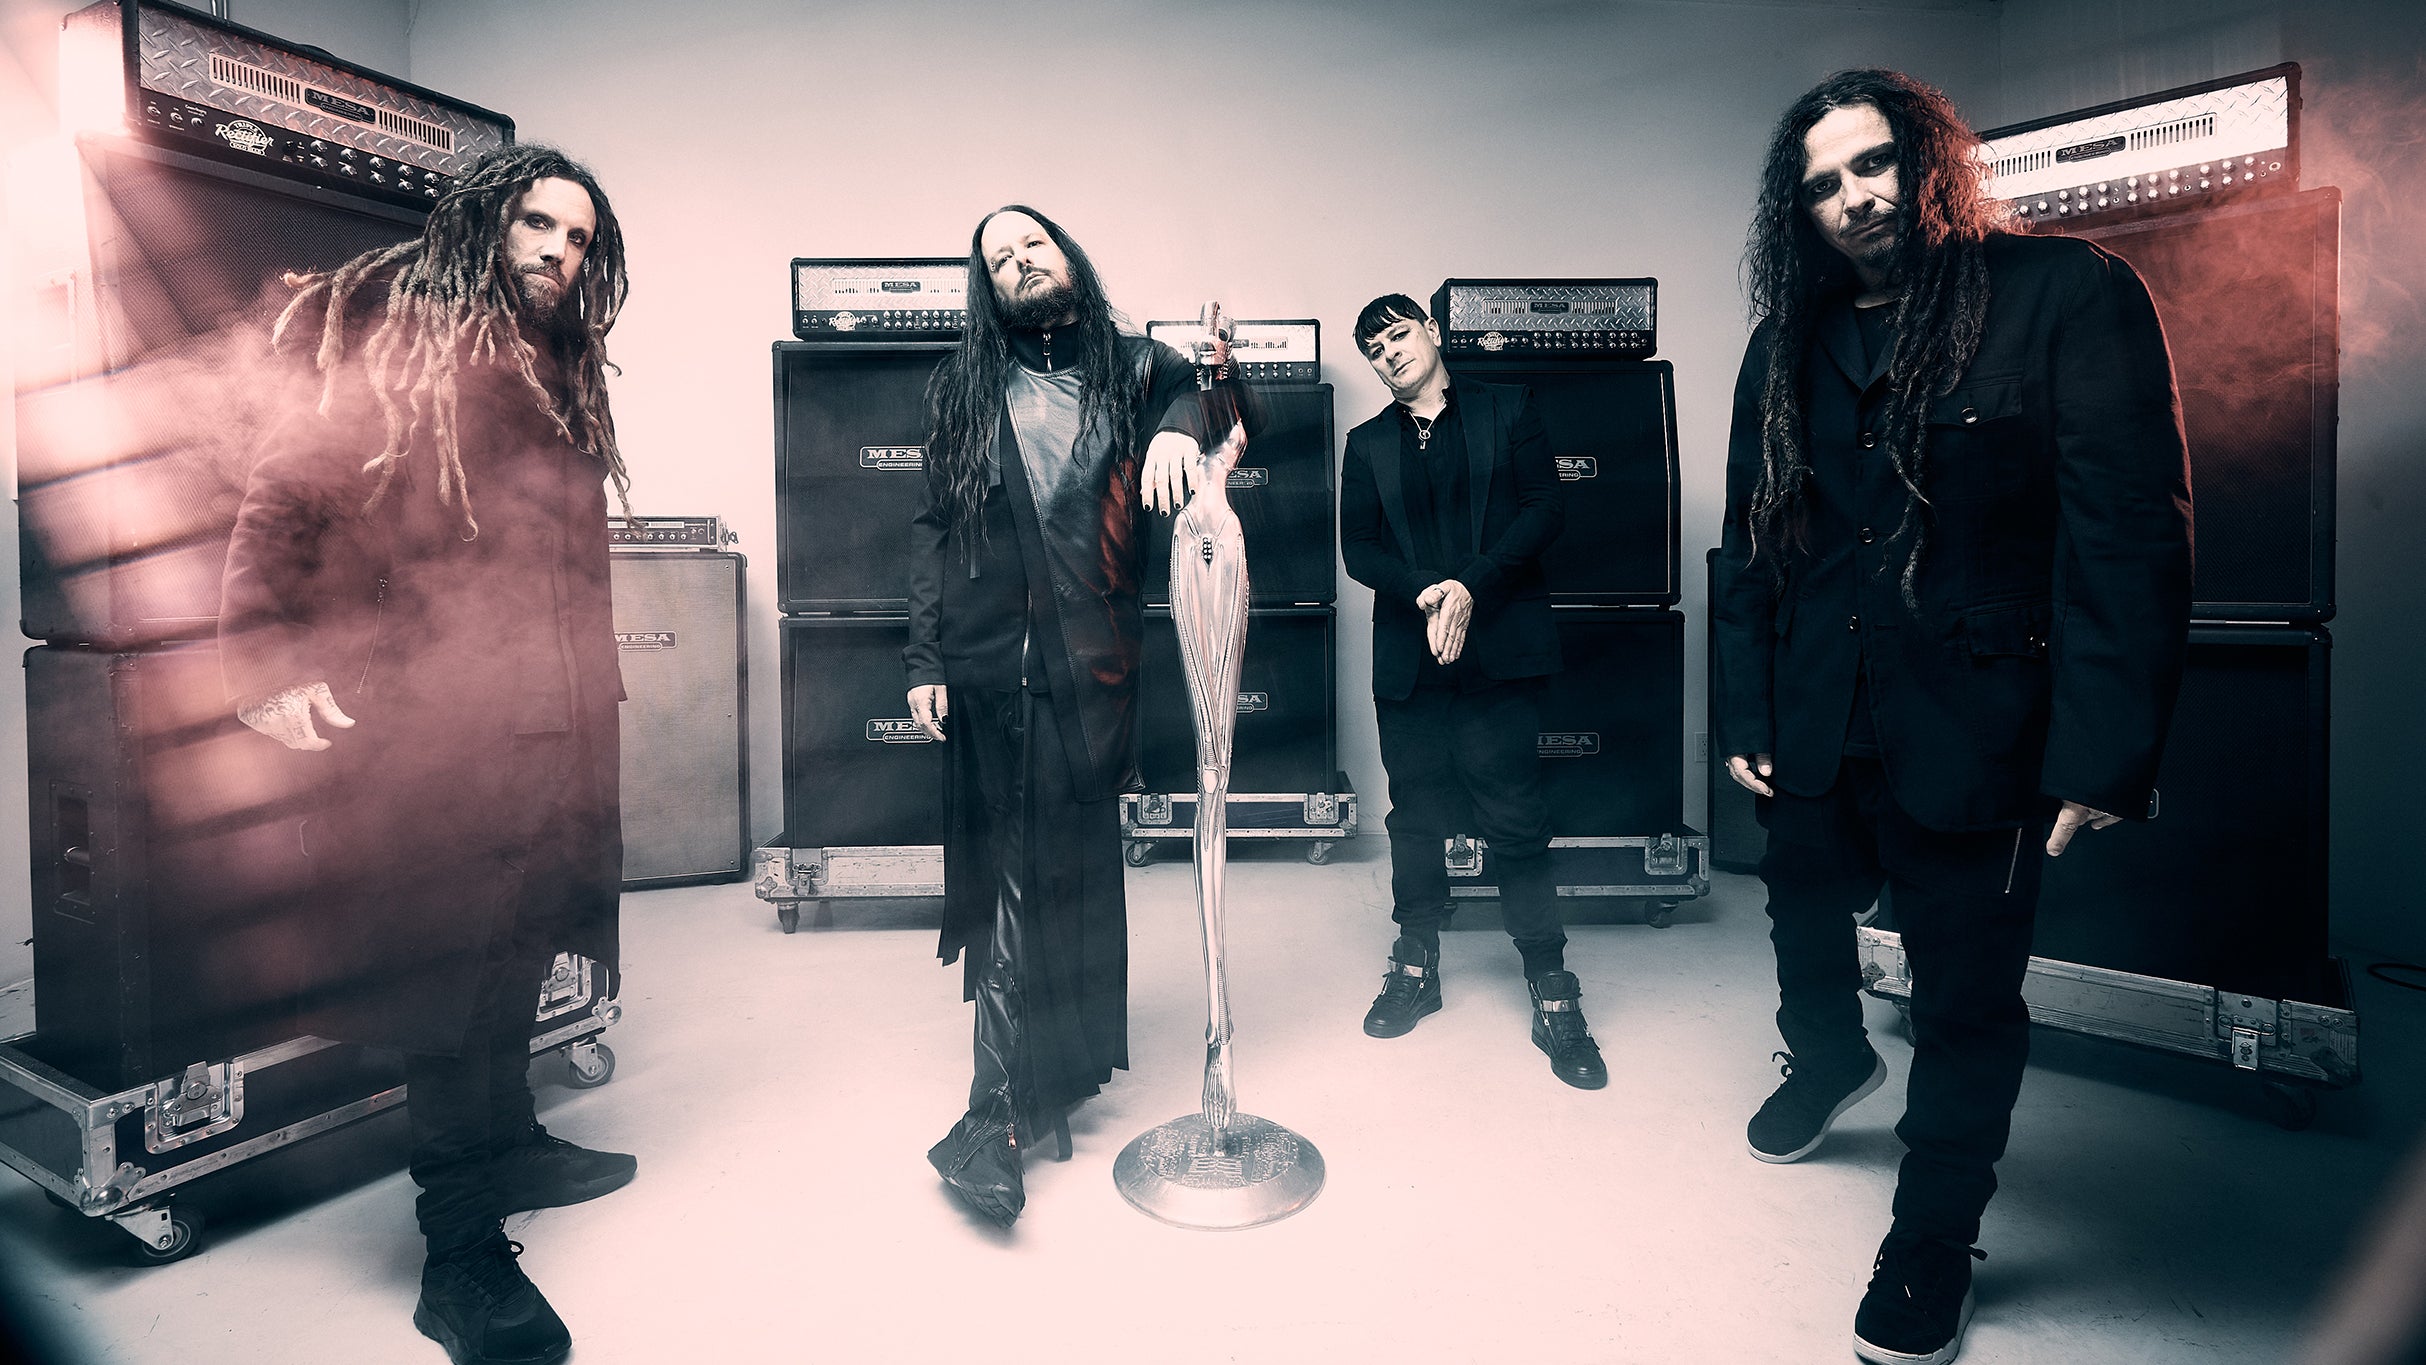 Korn presale password for approved tickets in Toronto